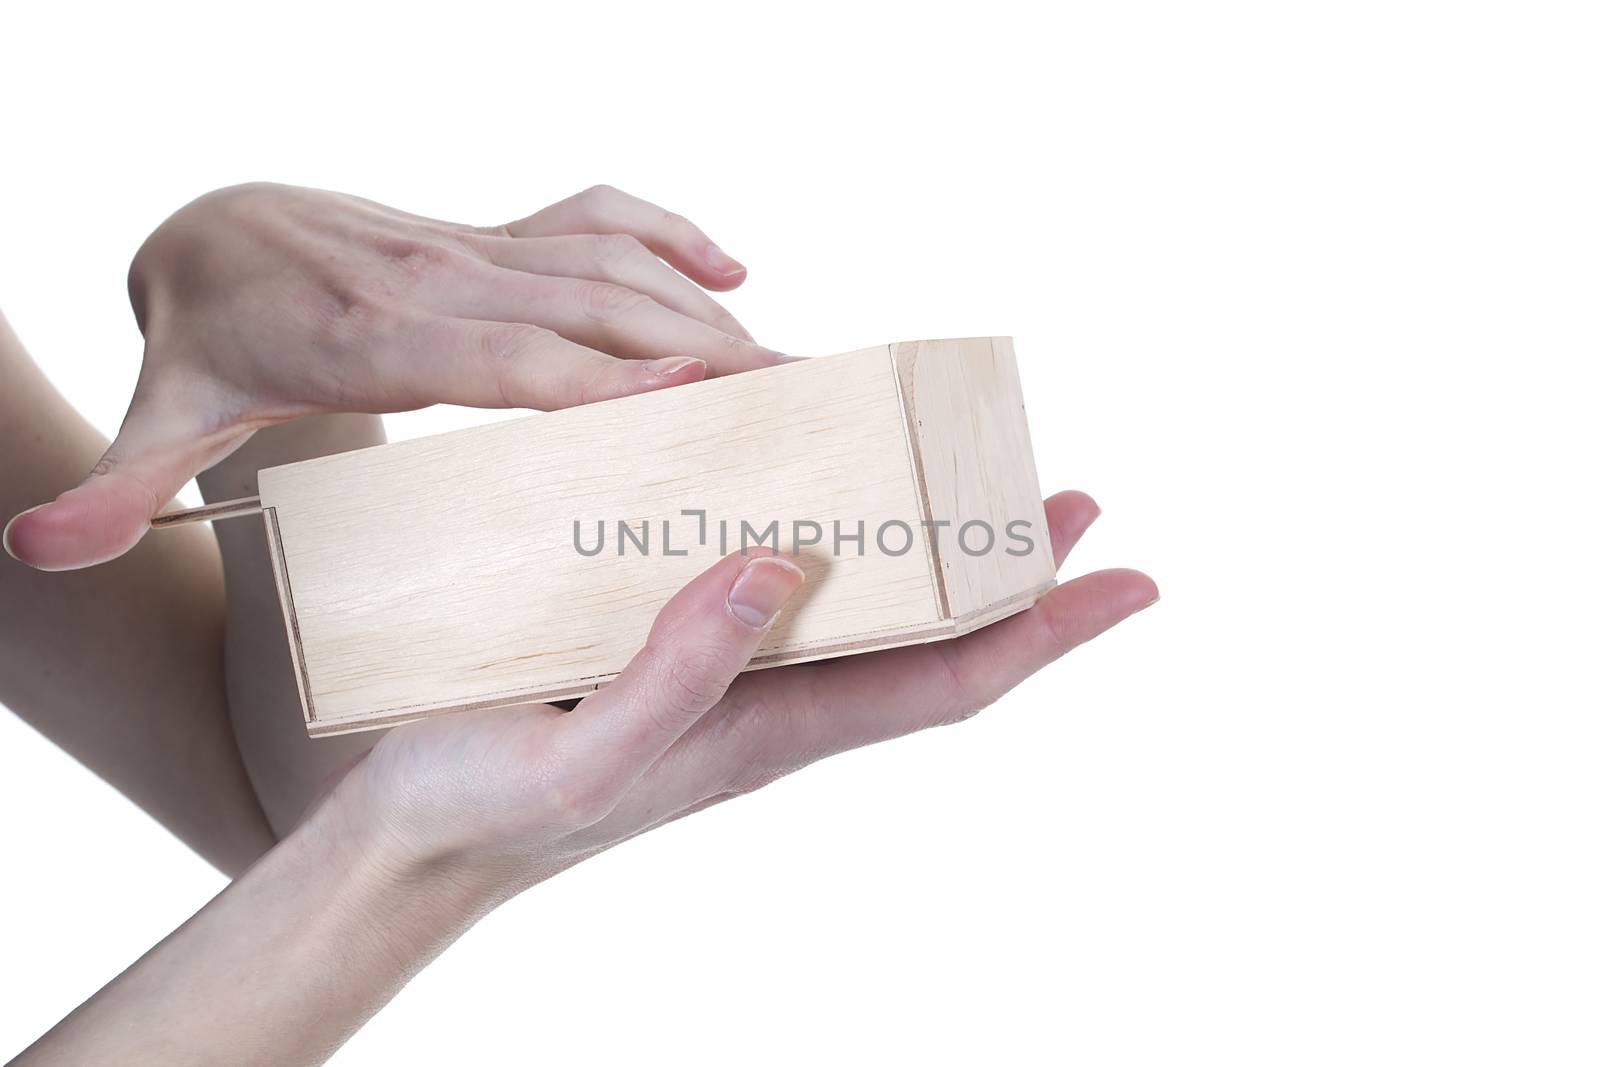 Hands of woman open wooden box on a white background